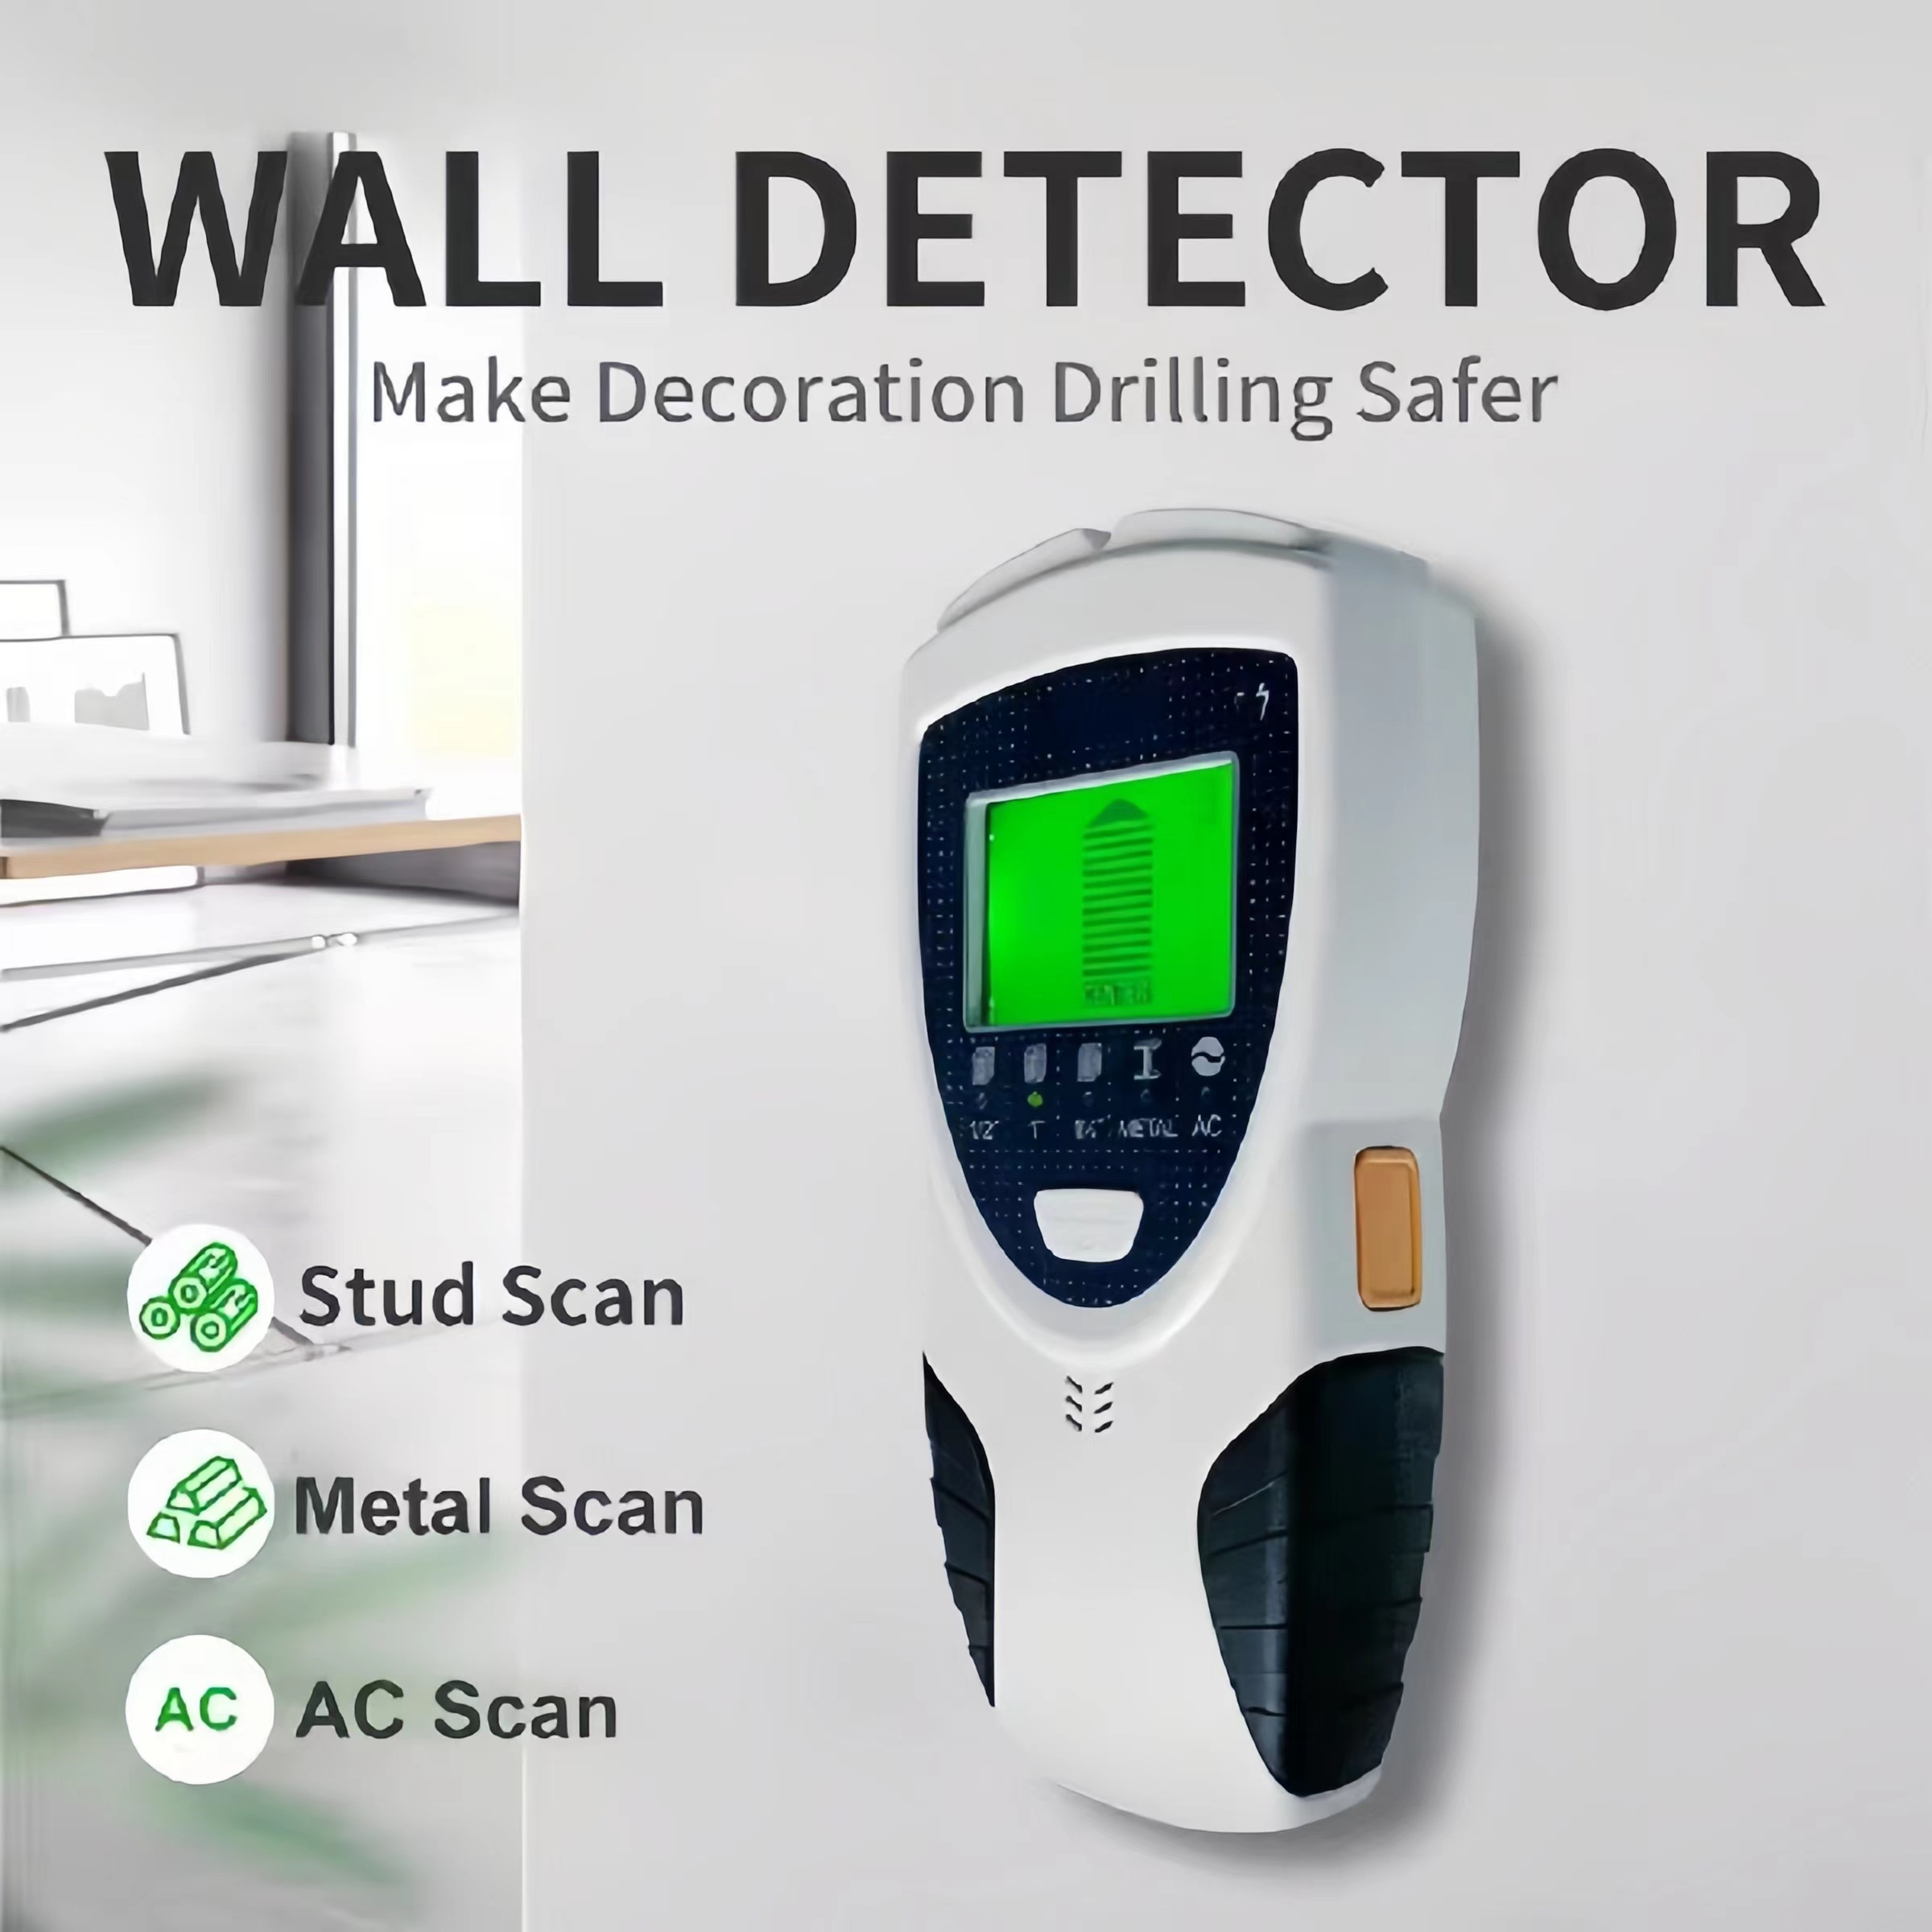 

5-in-1 Stud Detector With Intelligent Microprocessor And Hd Lcd Display: Accurately Locates Wood, Ac Wire, Metal Studs, Joist Pipes, And Pipes